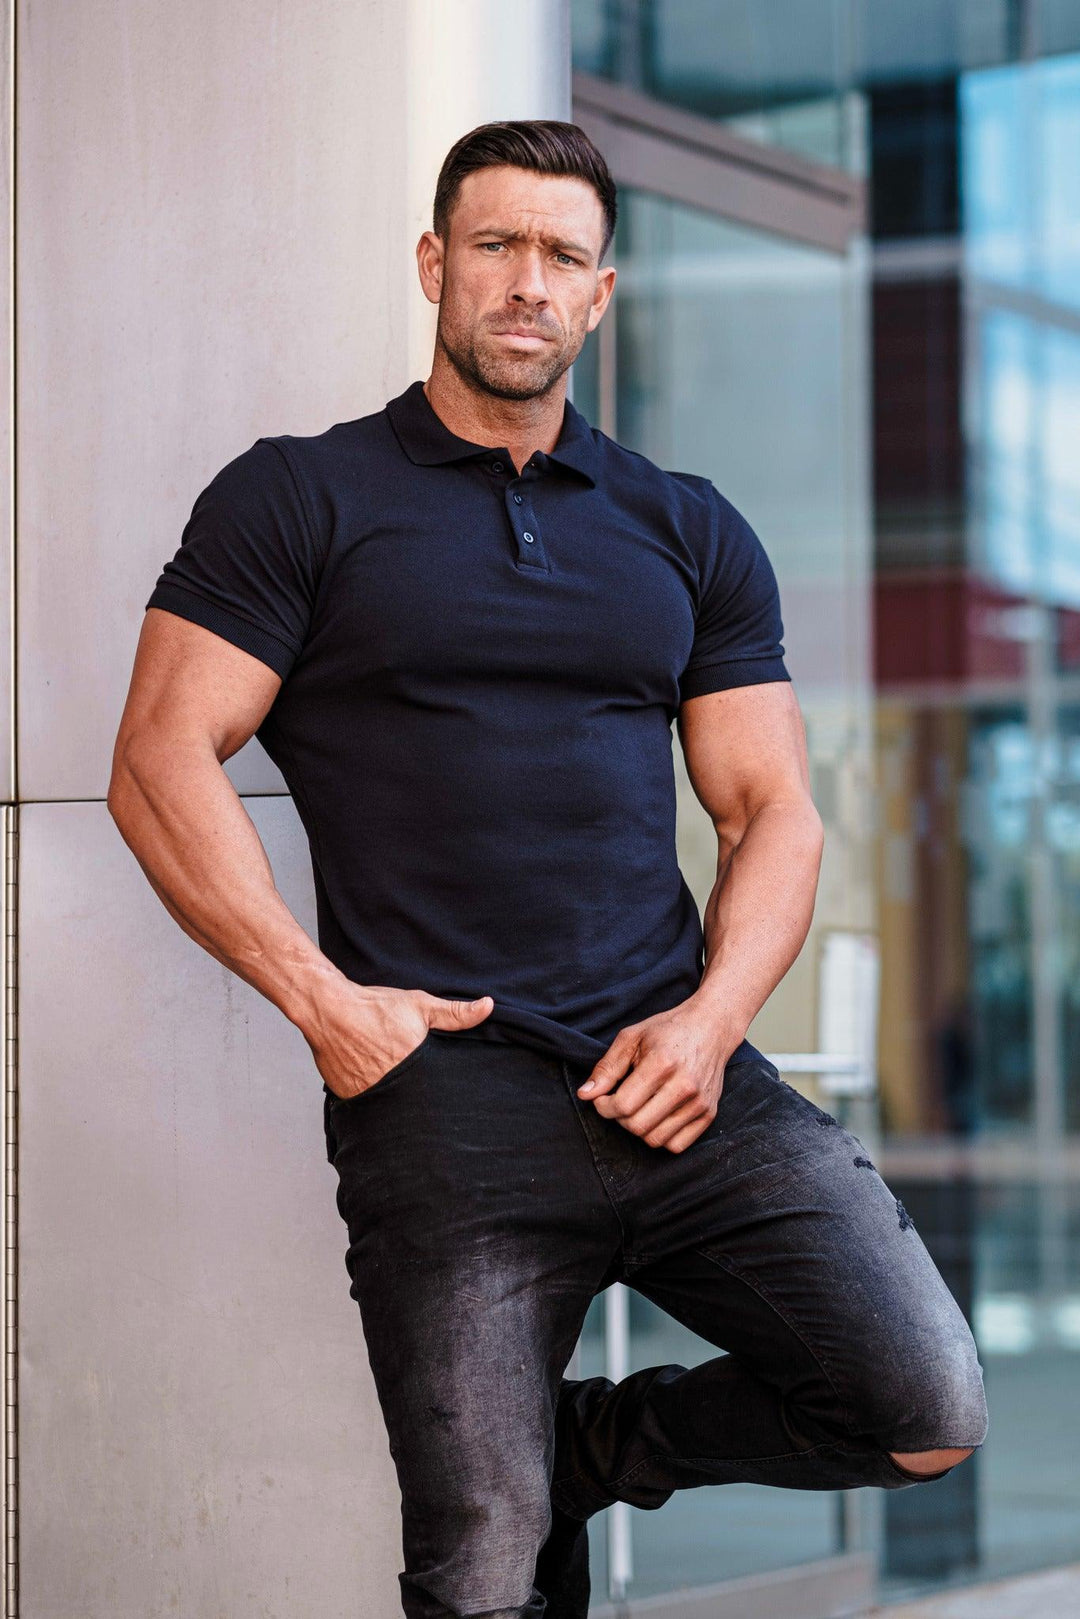 Muscle Fit Navy polo t shirt. A Proportionally Fitted and Muscle Fit Polo Shirt. Ideal for muscular guys.